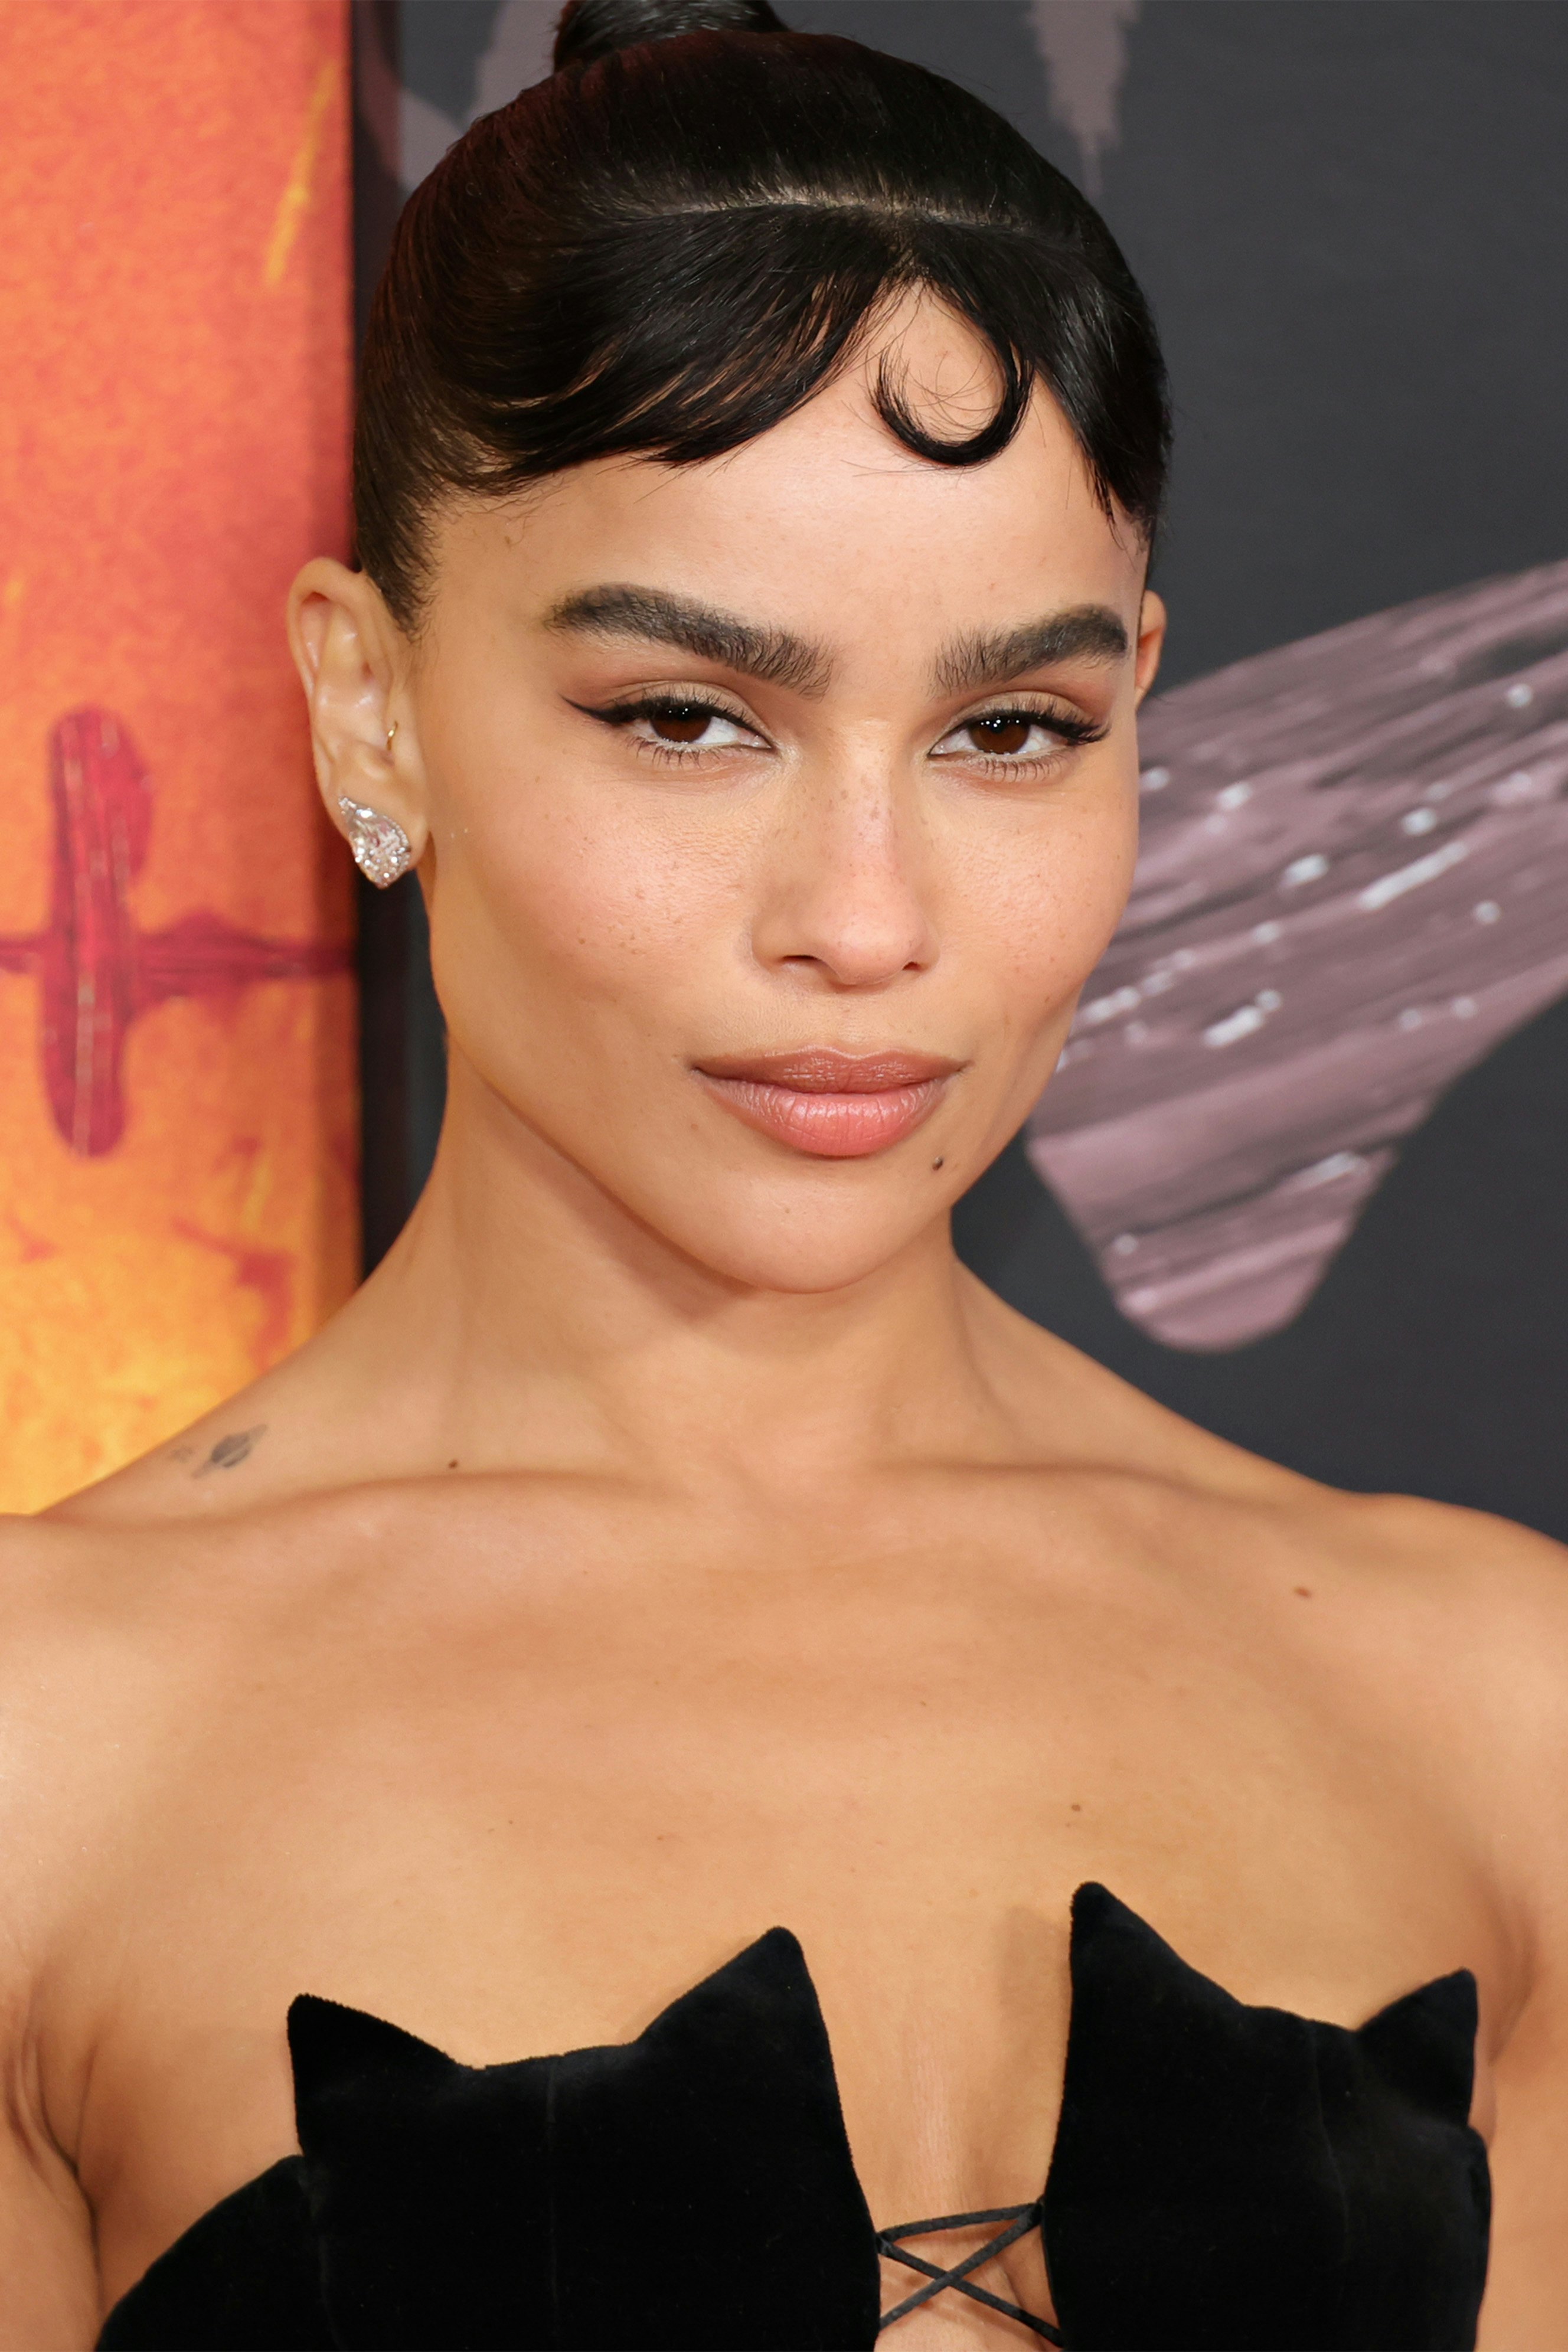 Zoë Kravitz has totally lost count of her tattoos